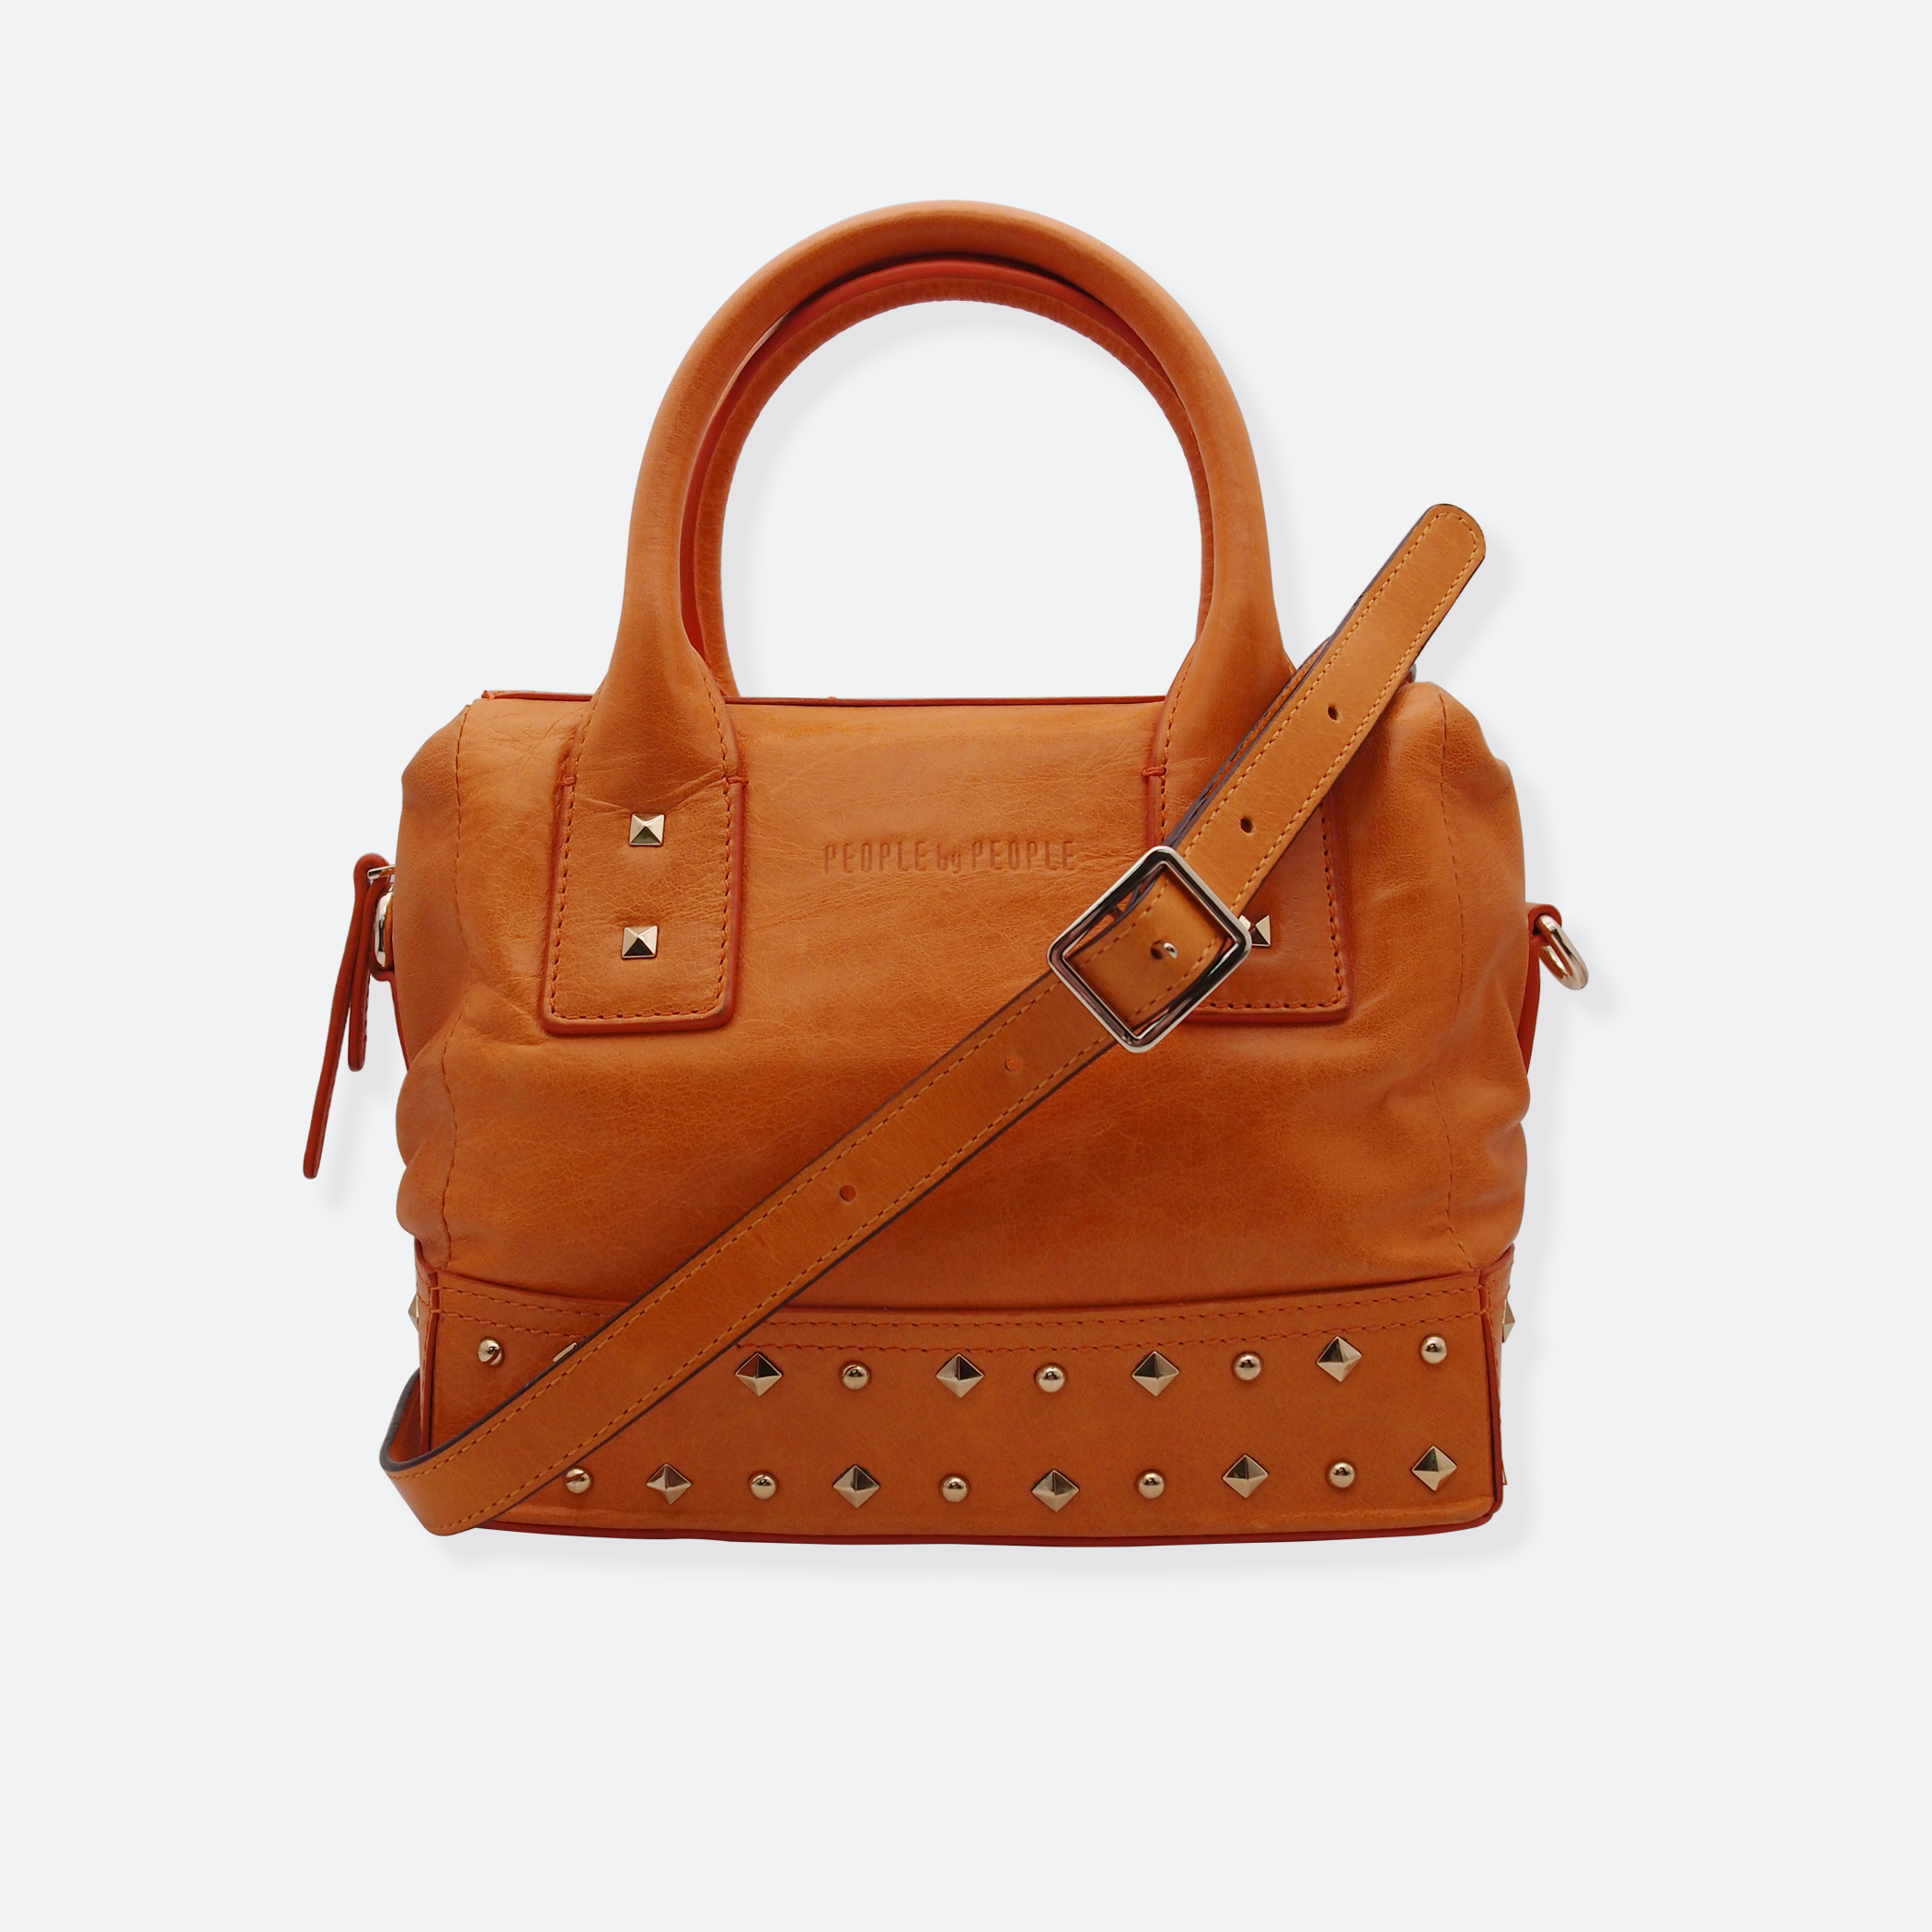 OhMart People By People – Leather Ding Satchel ( Orange ) 1